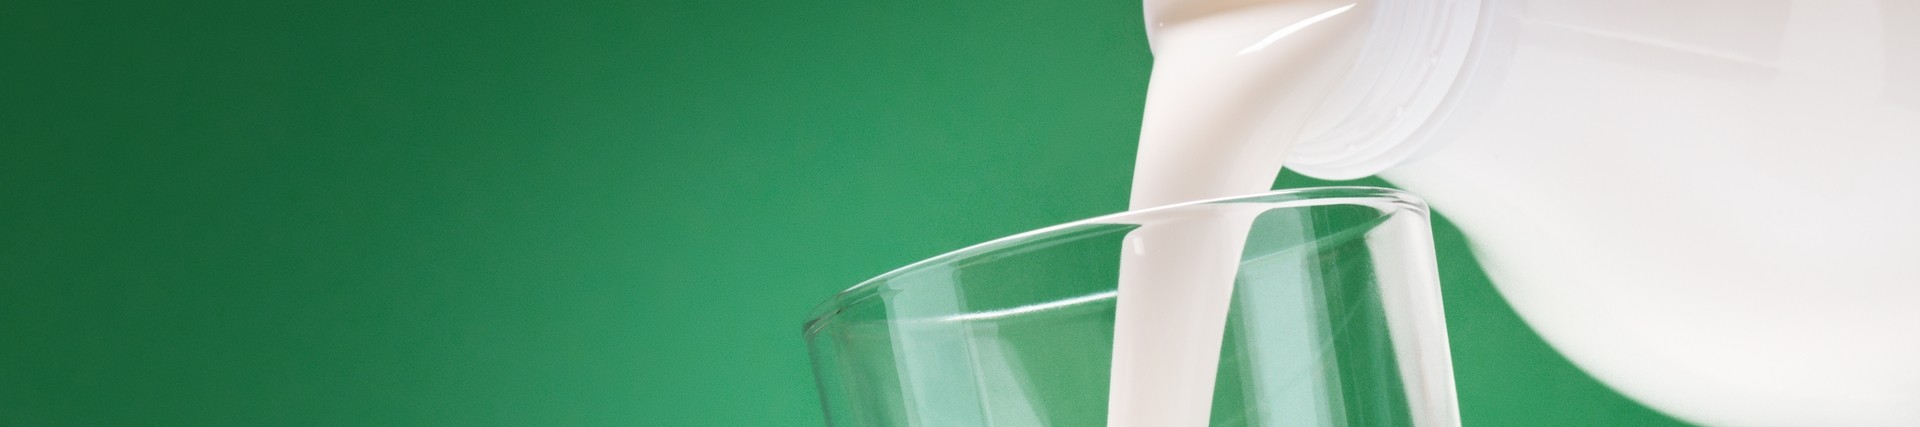 Milk being poured into a glass on a green background